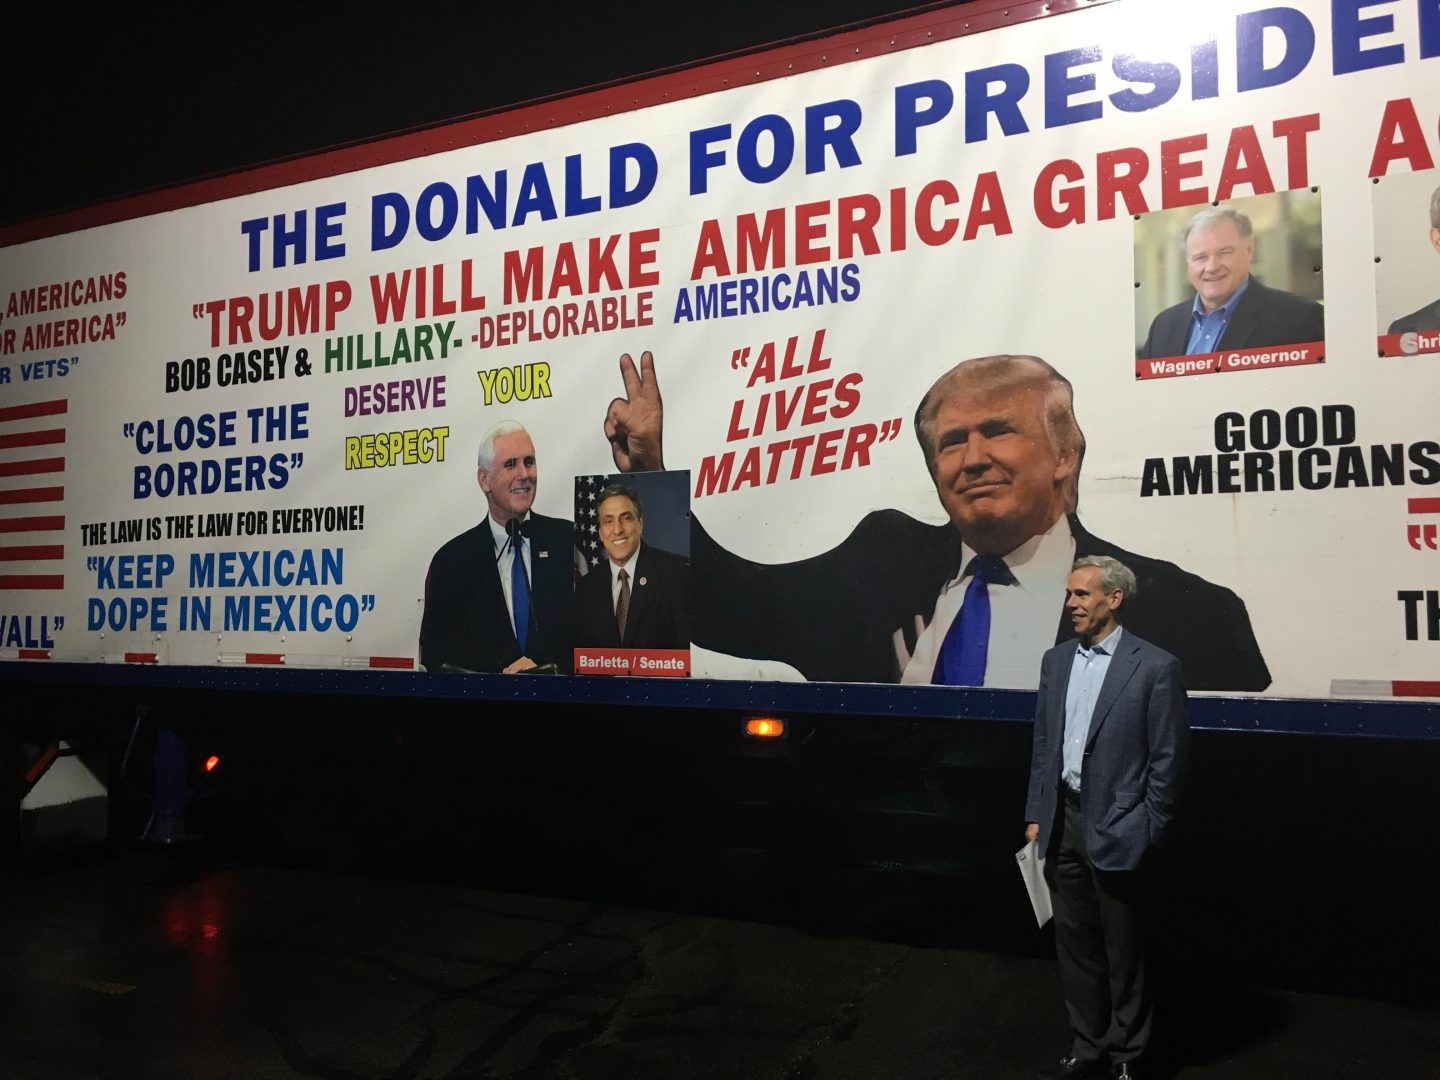 Republican congressional candidate John Chrin poses for a picture in front of a Donald Trump-themed tractor-trailer on Sept. 12, 2018 in Luzerne County.